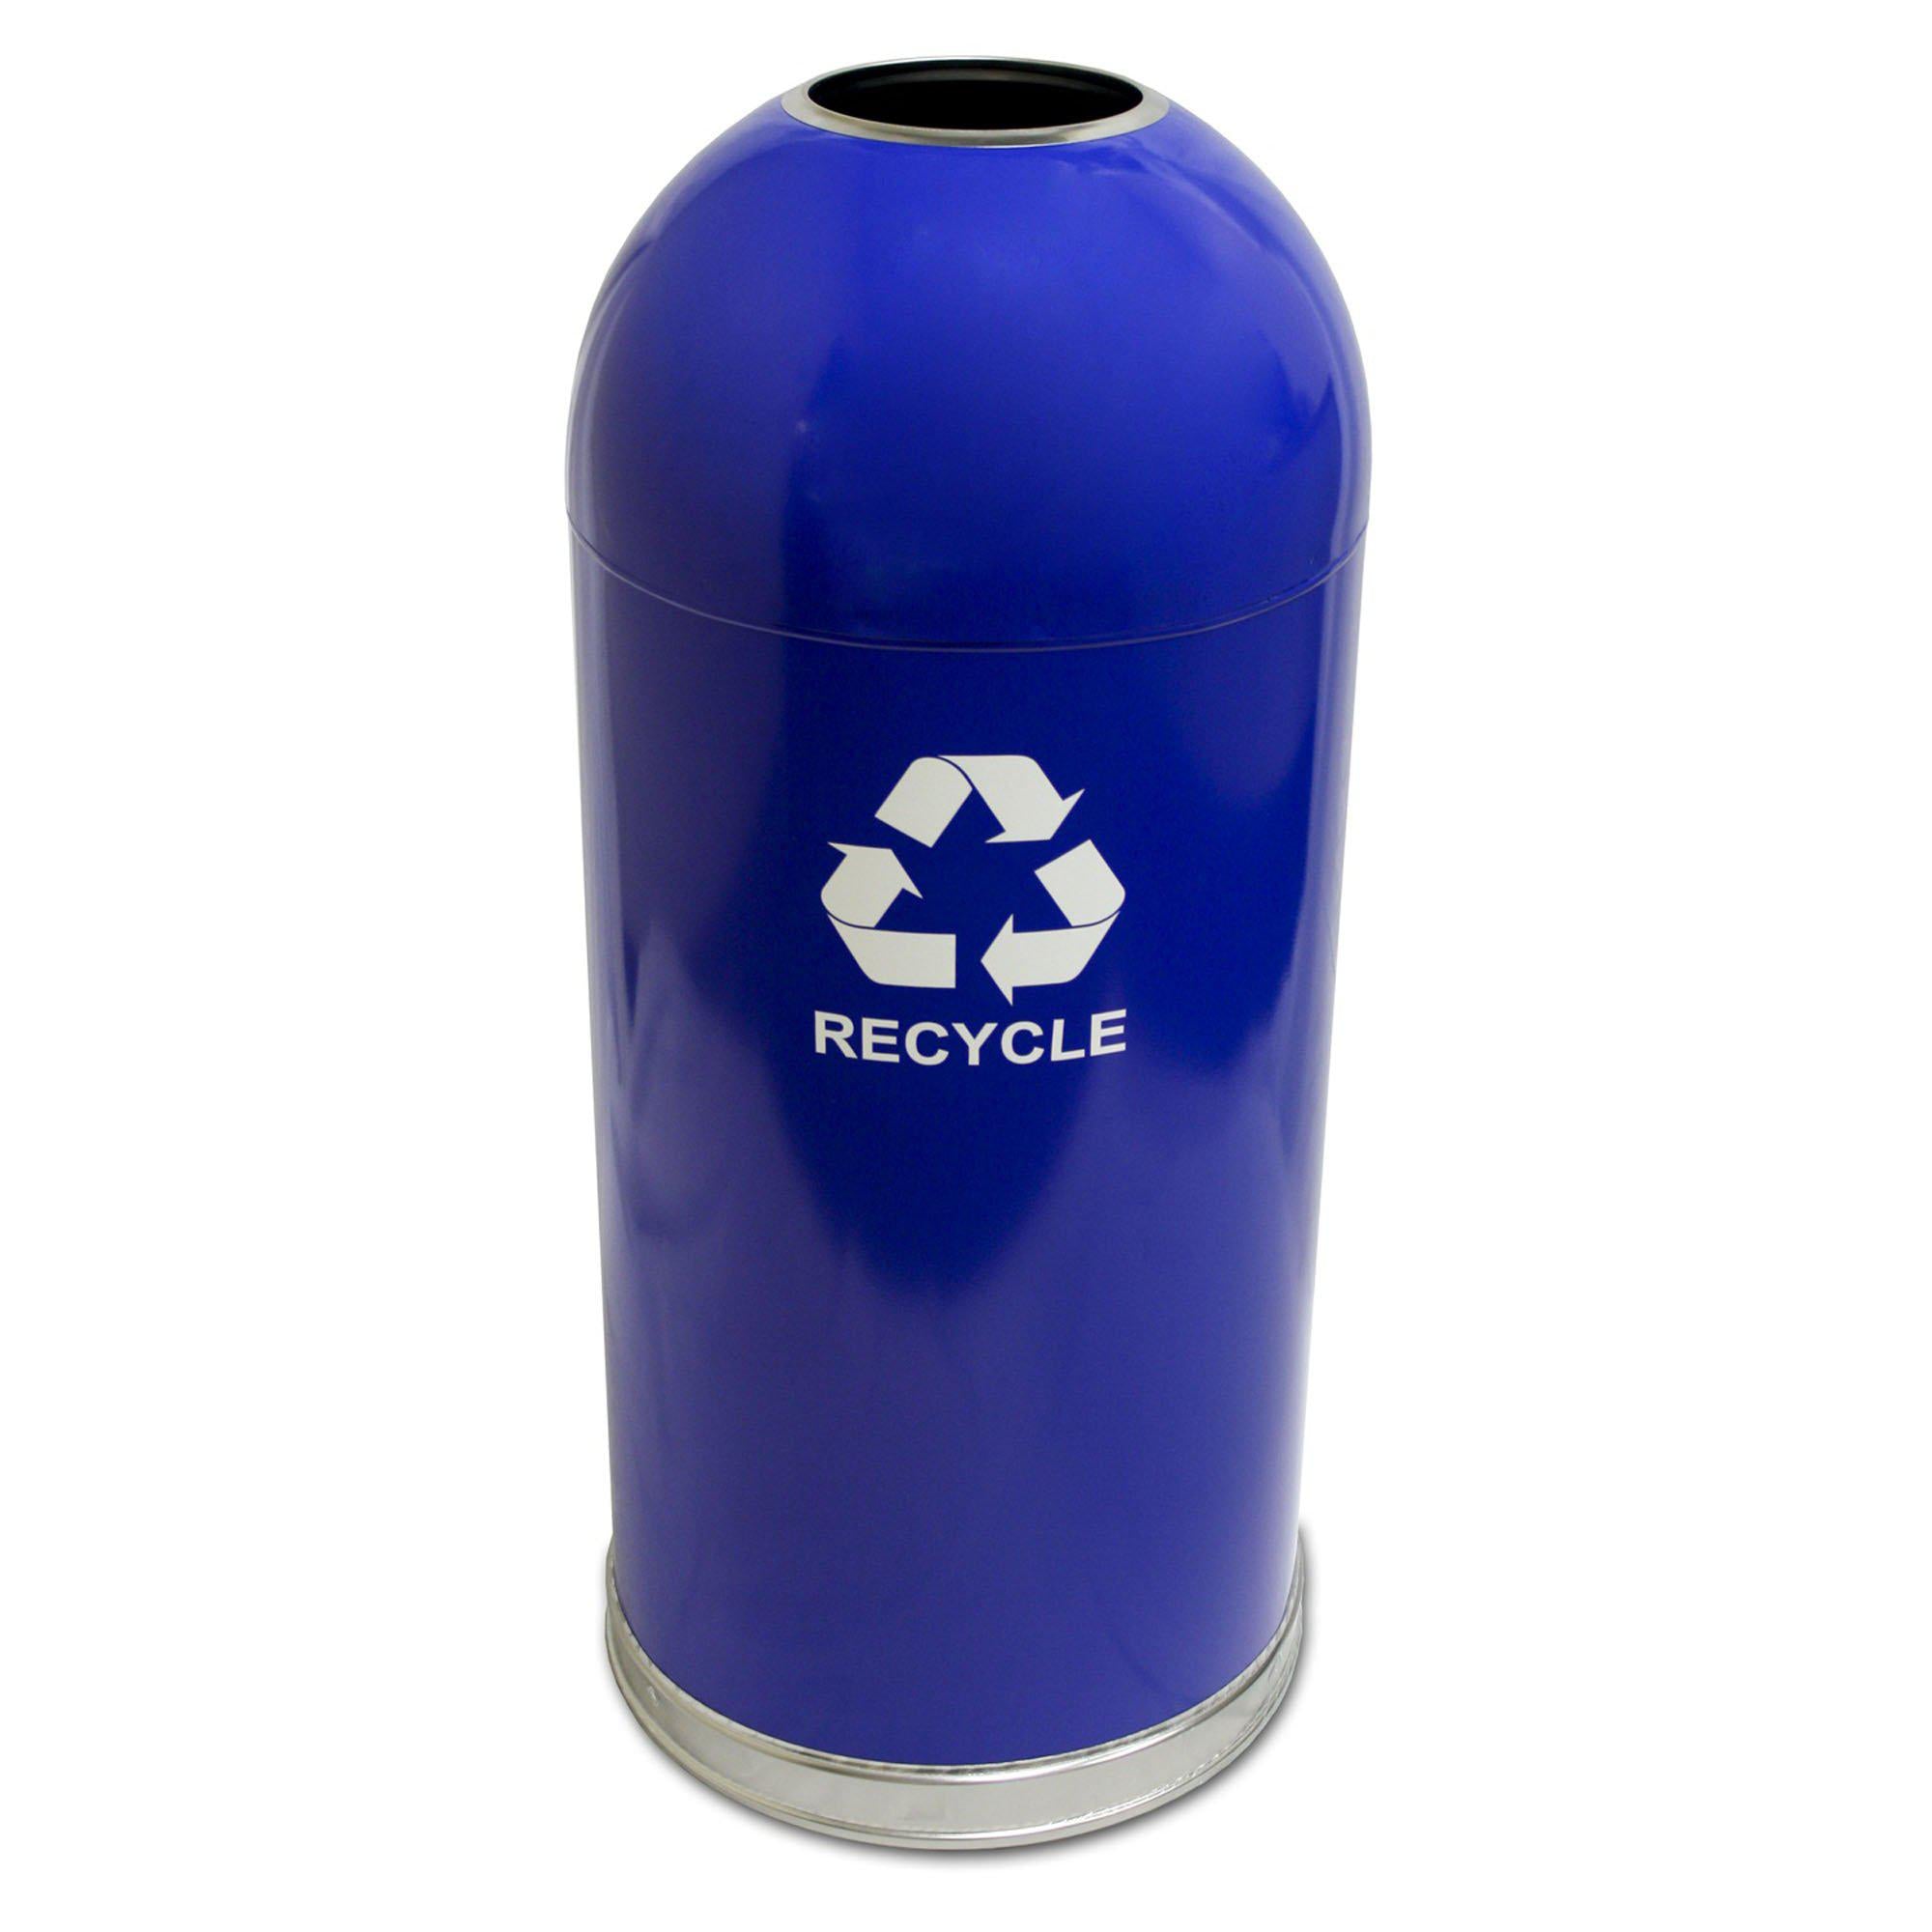 Dome Top Indoor Recycling Container, 15-Gallon Capacity